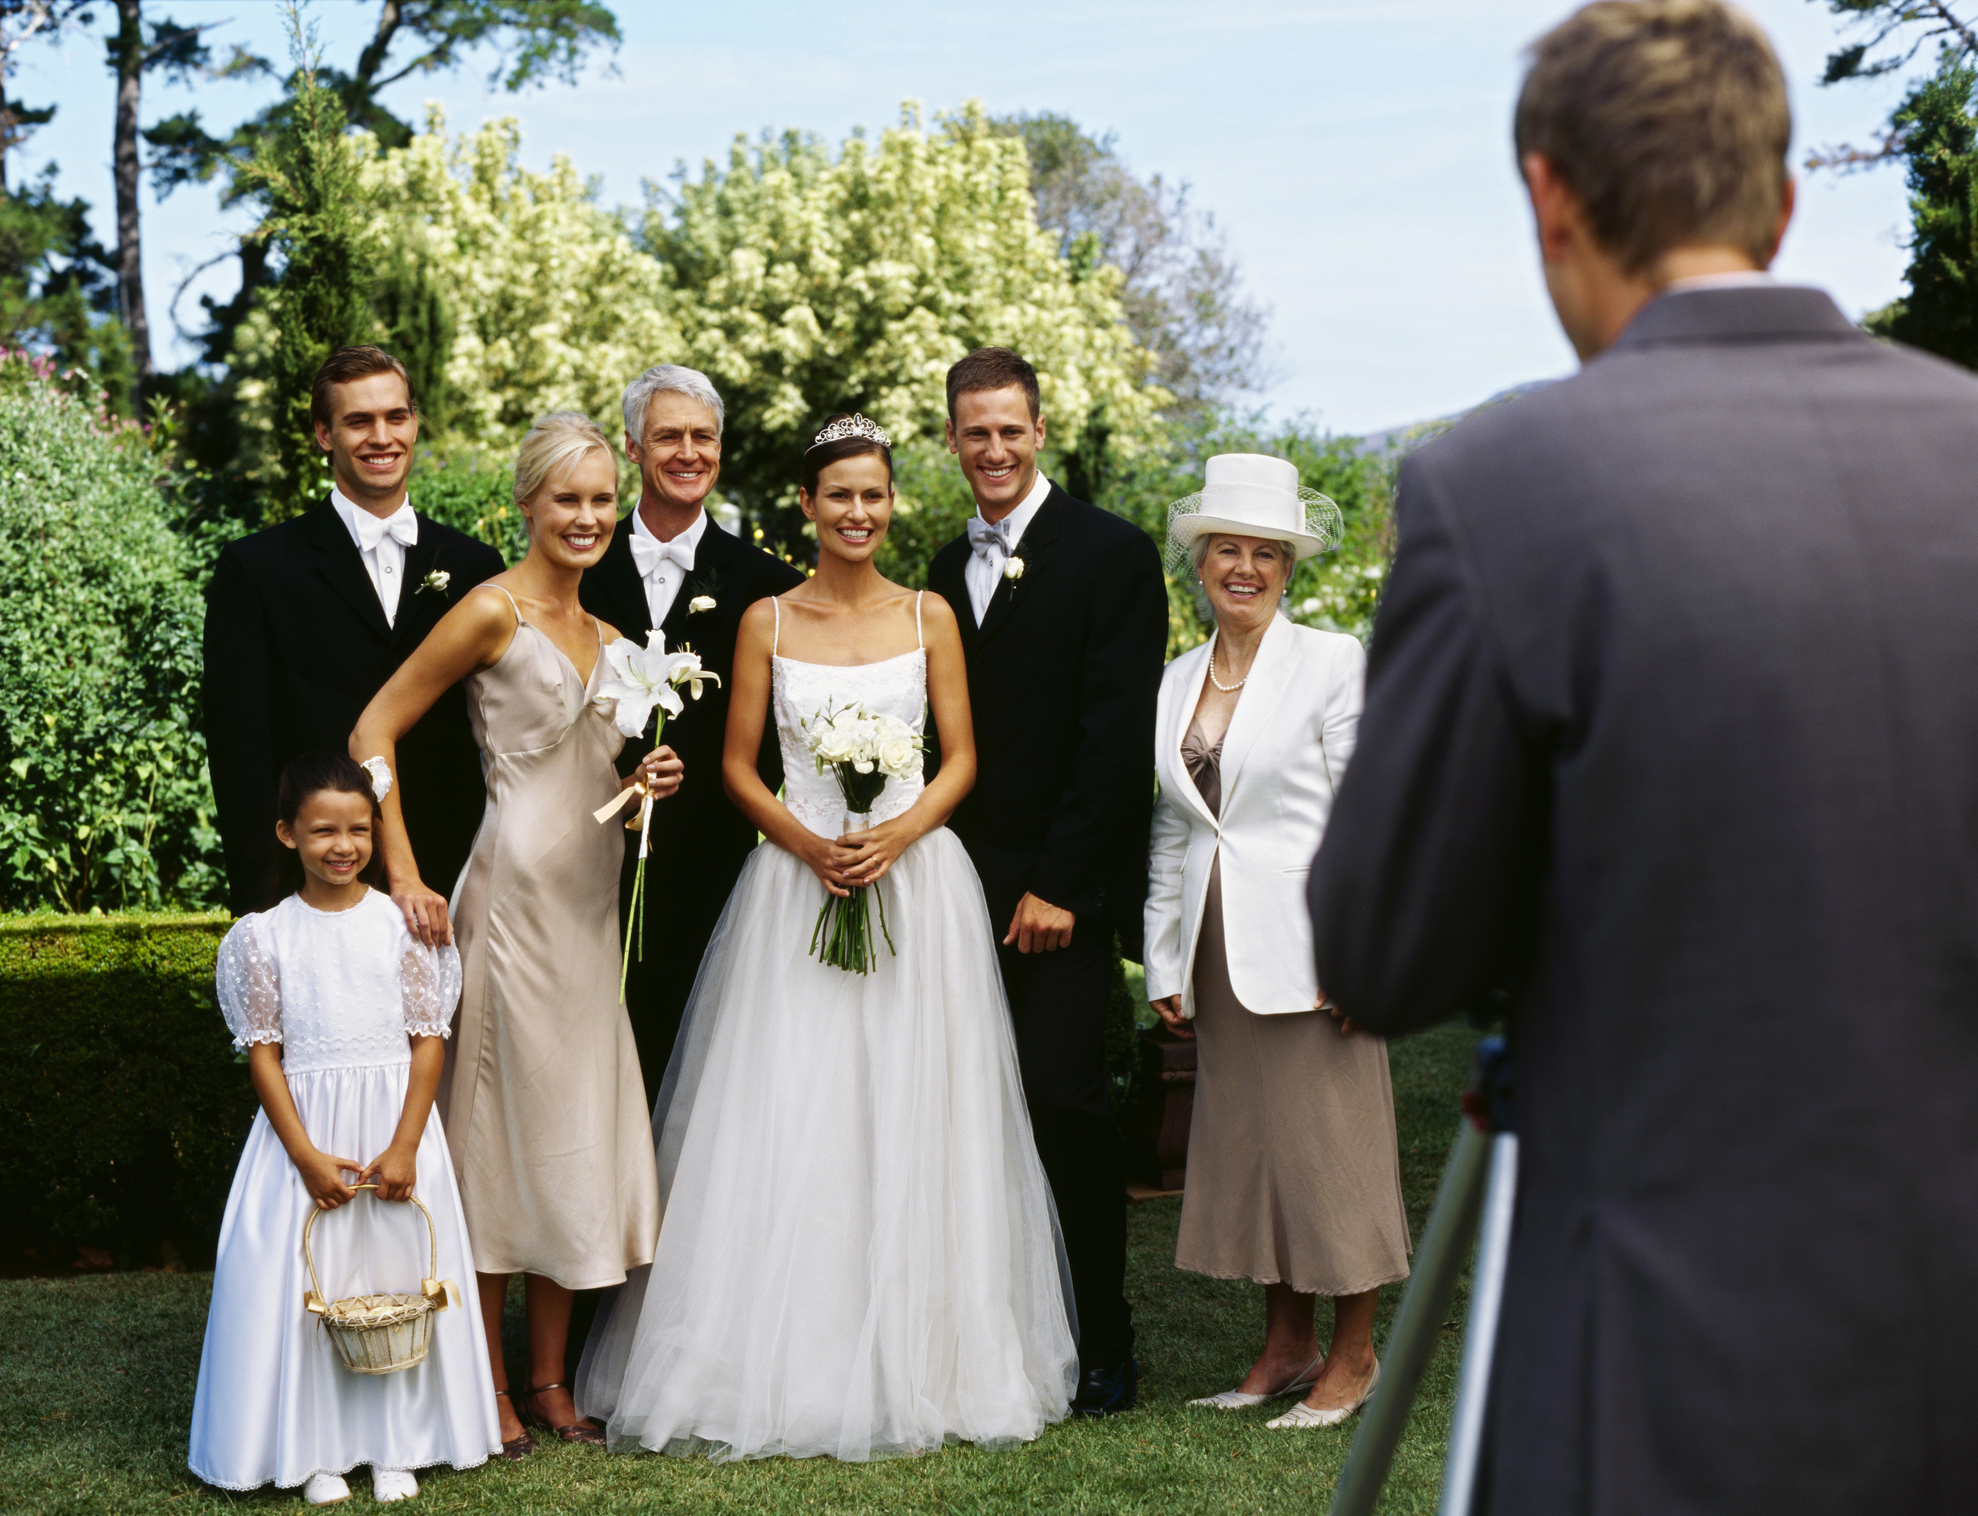 Wedding photo of a couple with family and photographer in foreground